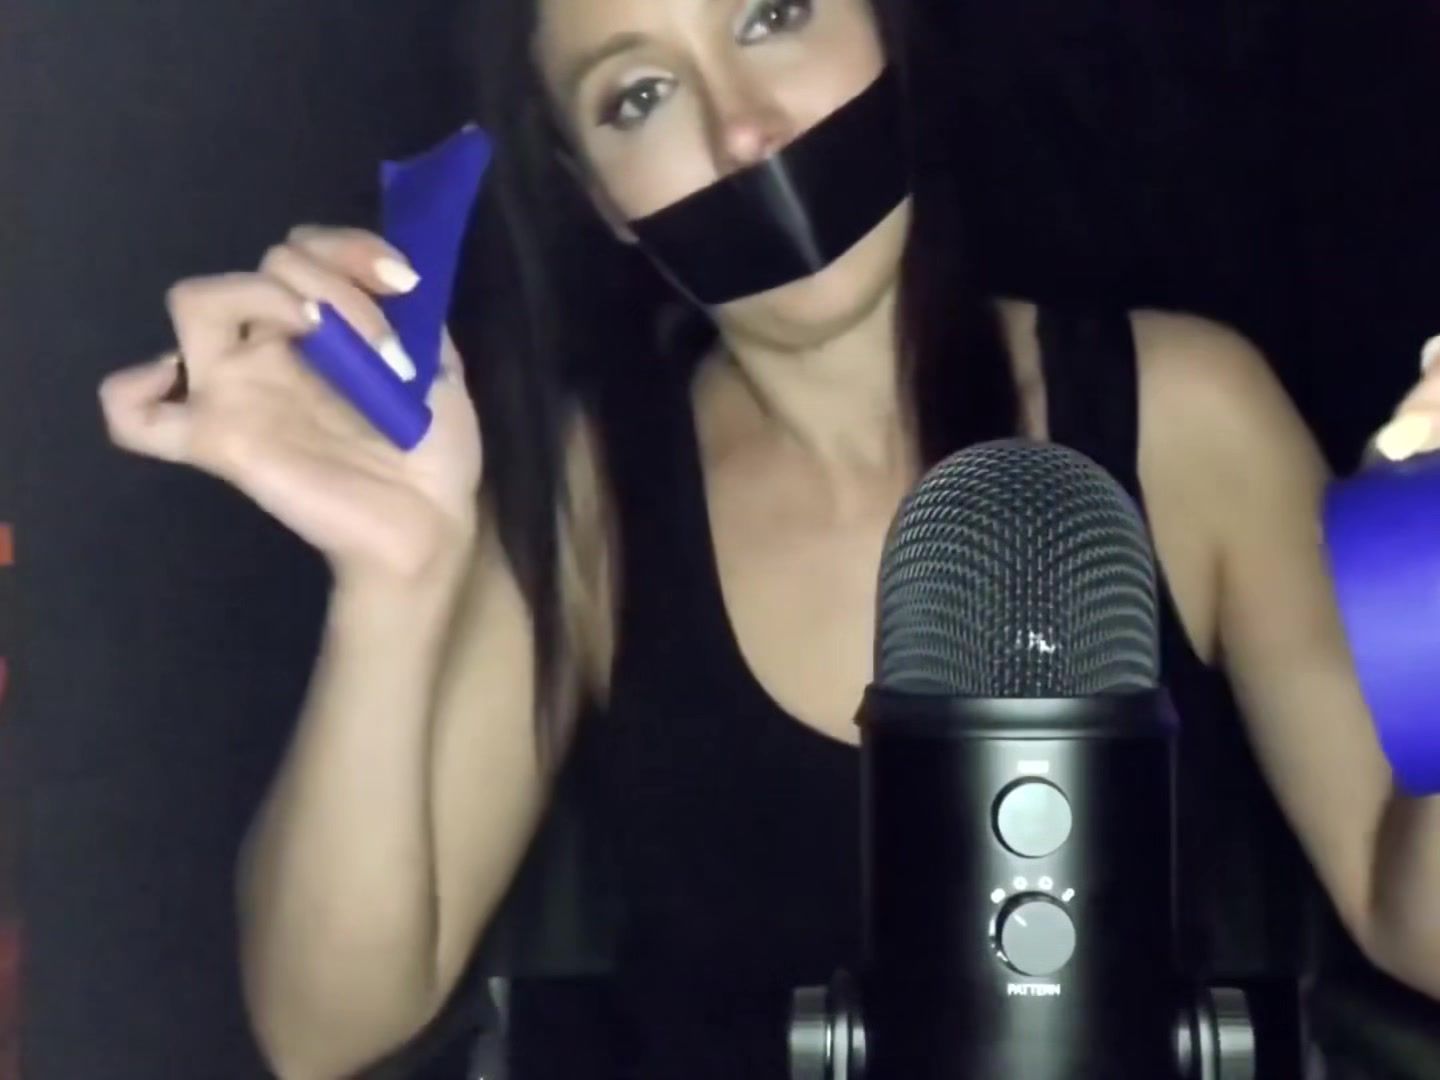 Weird Asmr Tape Triggers With Different Tape Big Black Tits